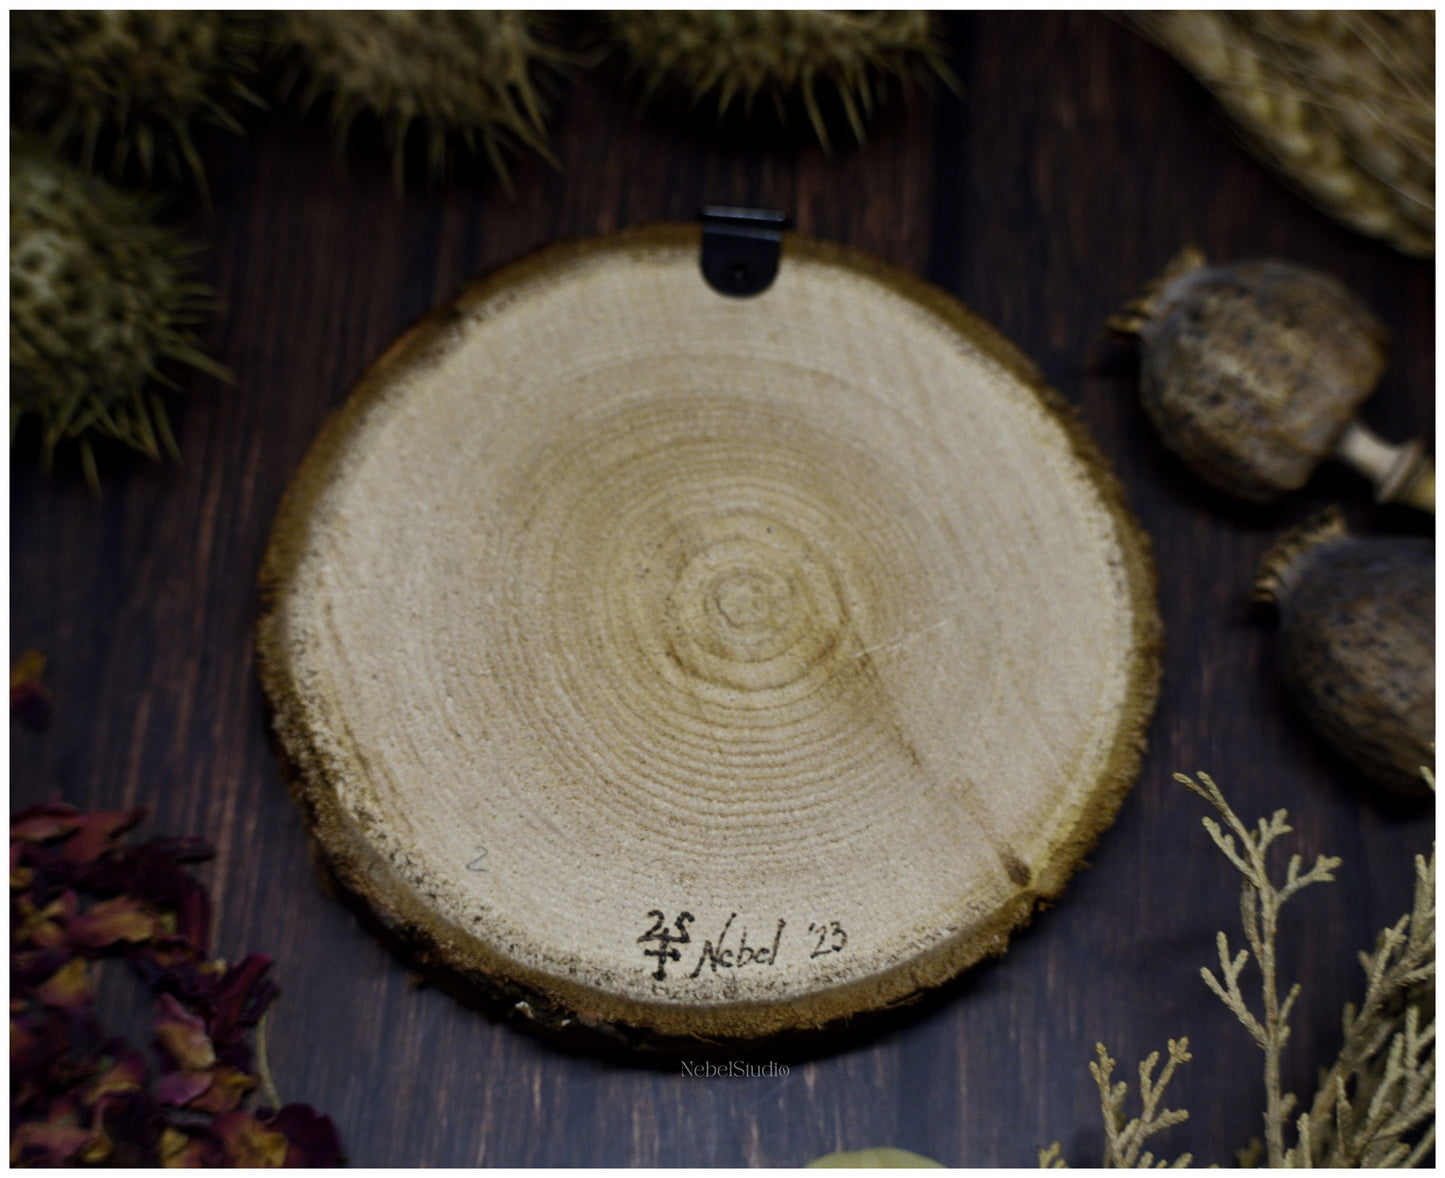 Hexafoil Moons pyrographed wood